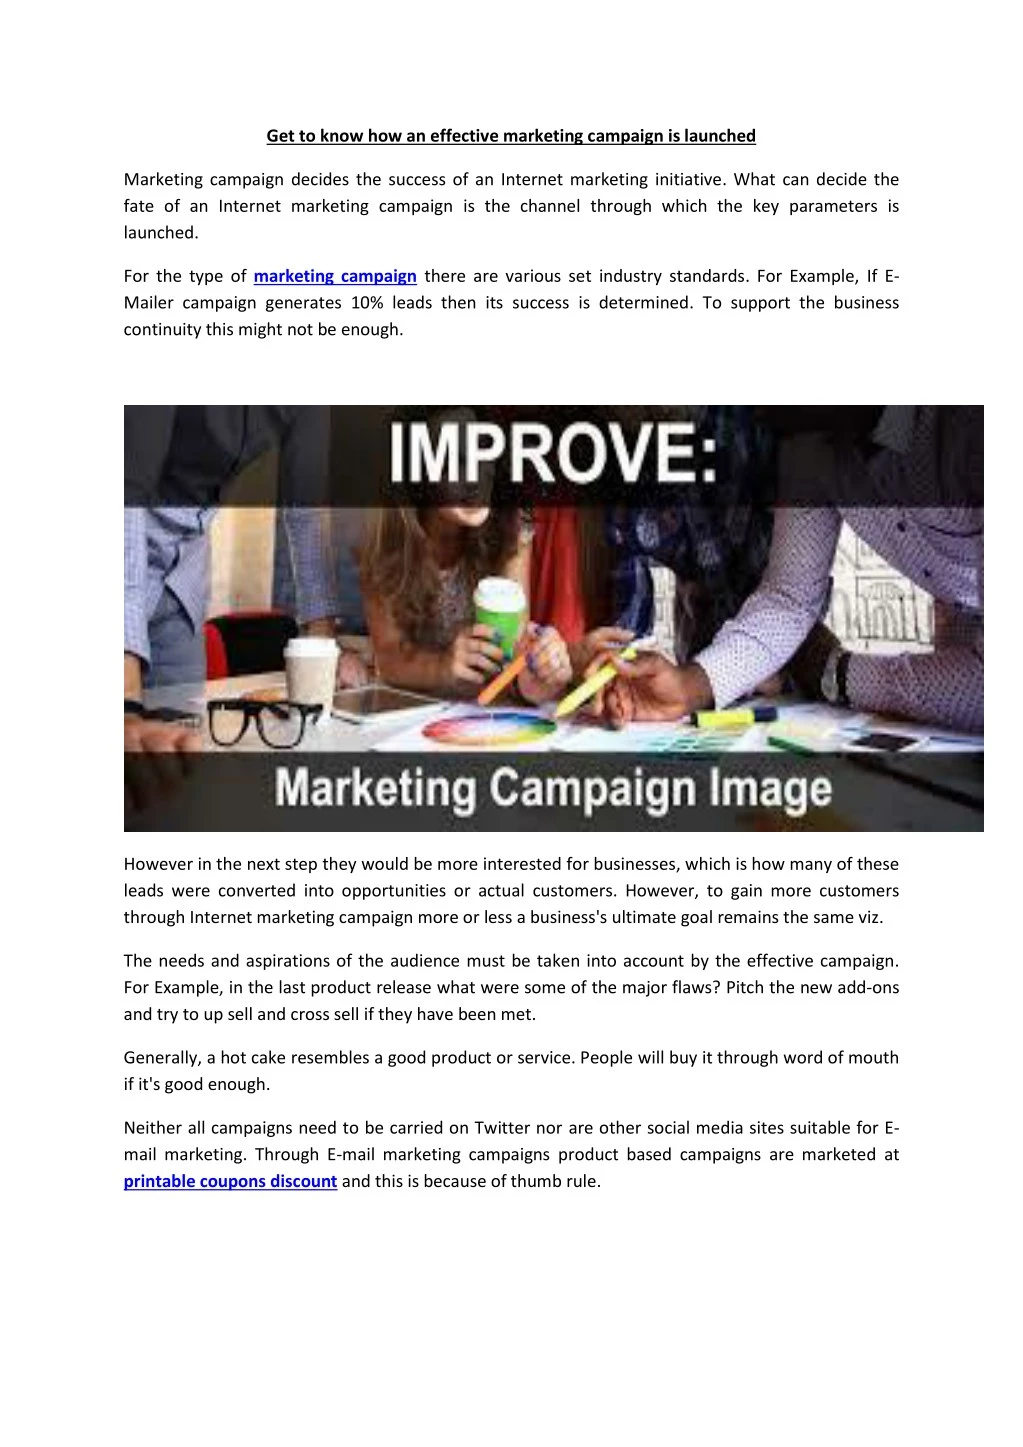 get to know how an effective marketing campaign